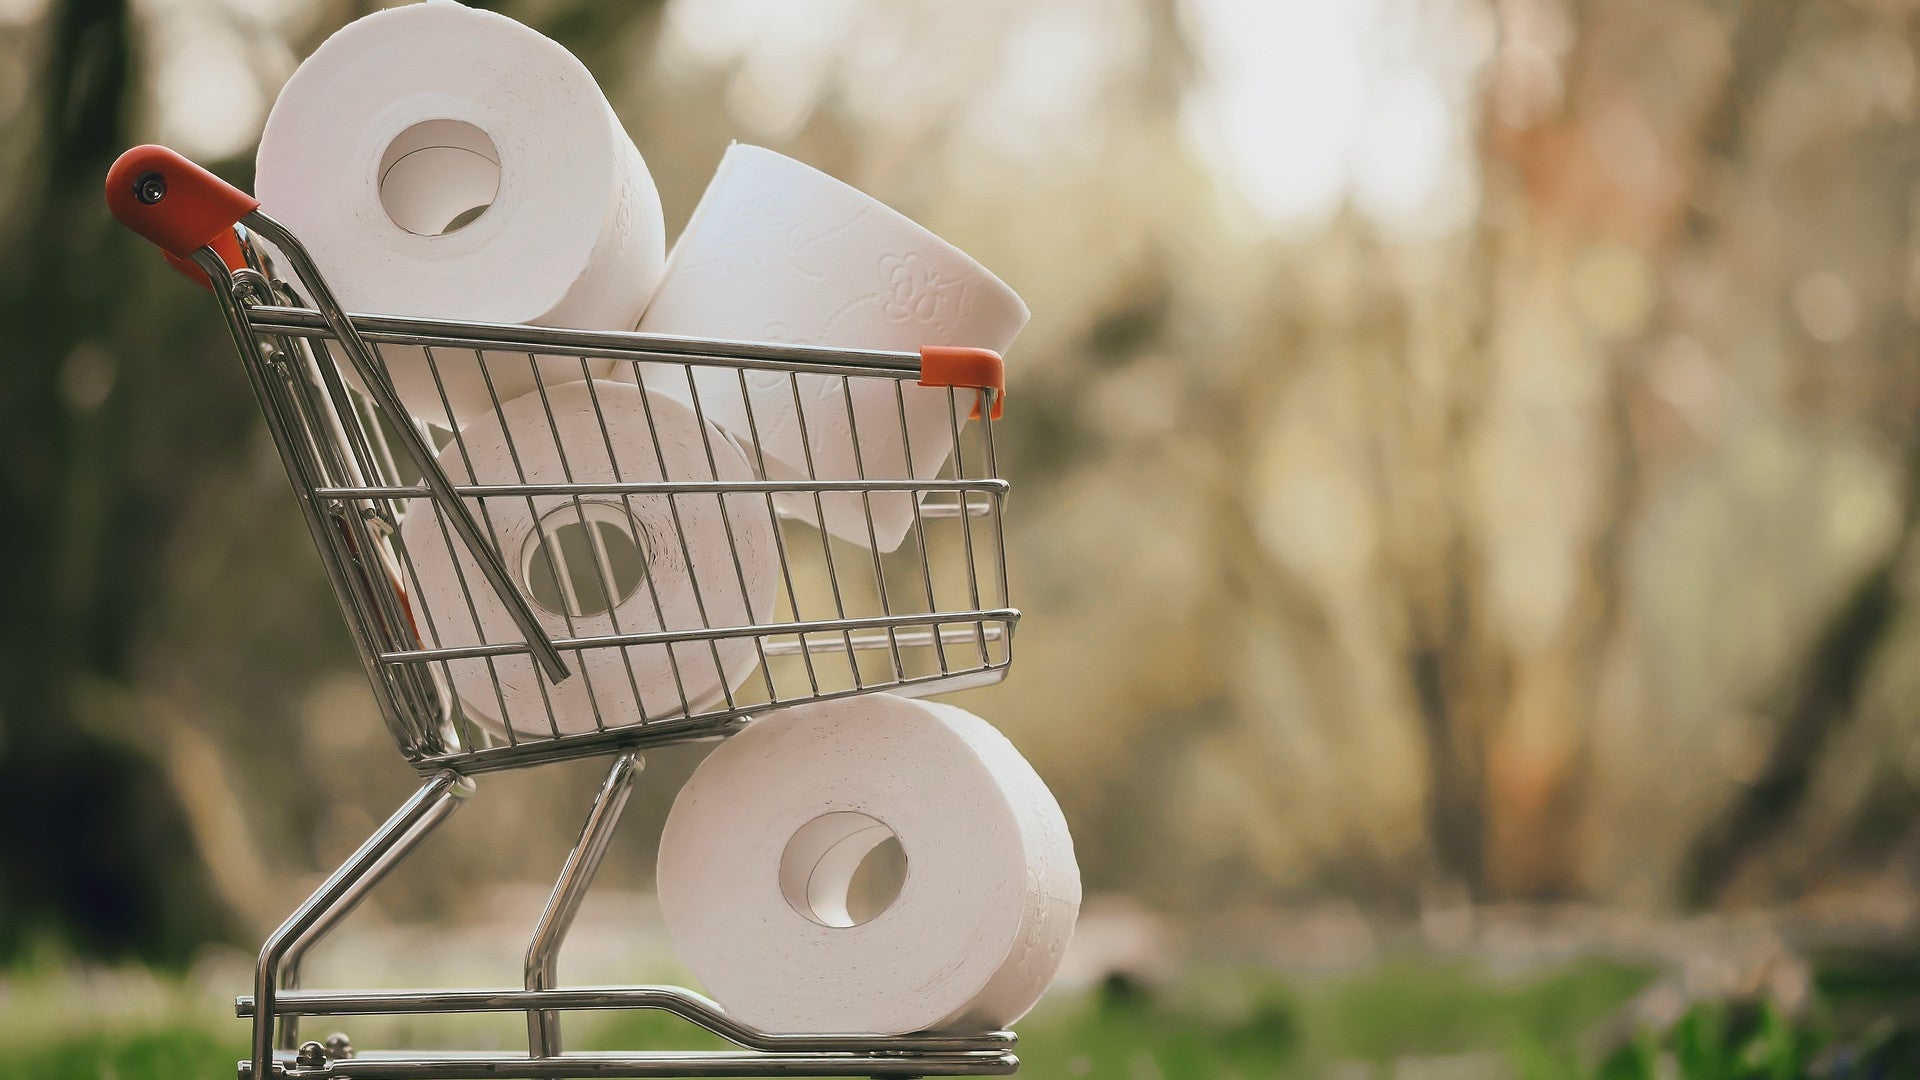 Why did People Panic-Buy Toilet Rolls during COVID-19?